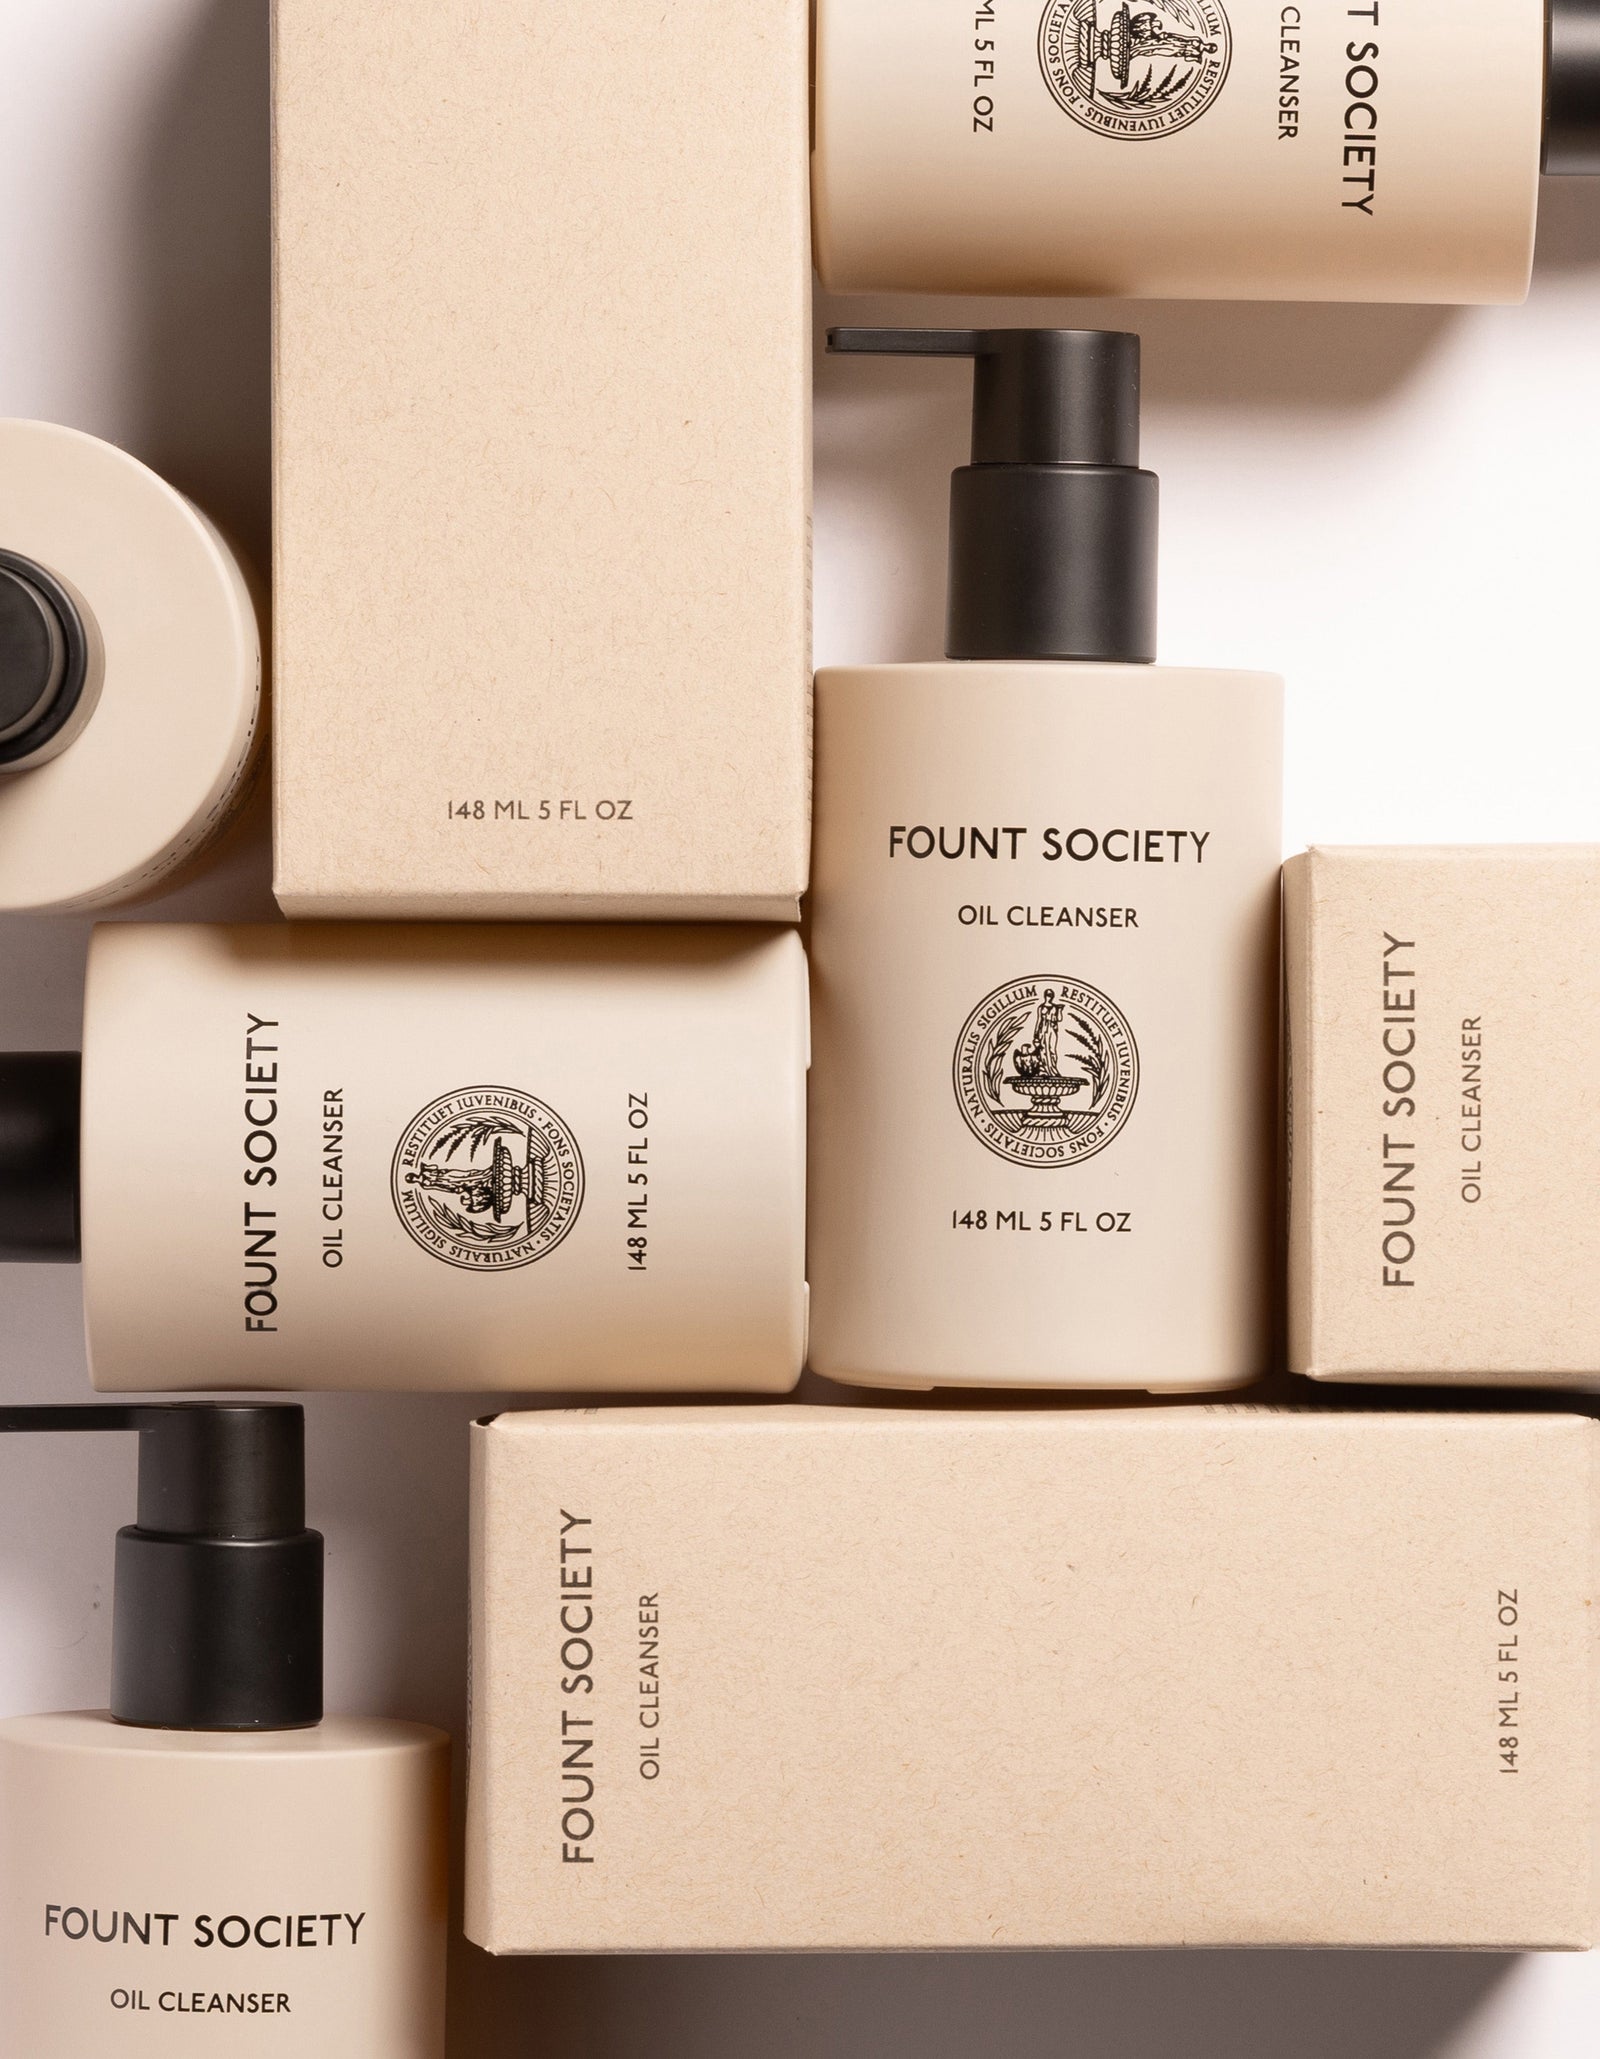 Flat lay of bottles and boxes of Cozy Earth Oil Cleanser, featuring a minimalistic design in a beige color palette with a black pump dispenser. The product details and brand logo are visible on both the bottles and packaging.